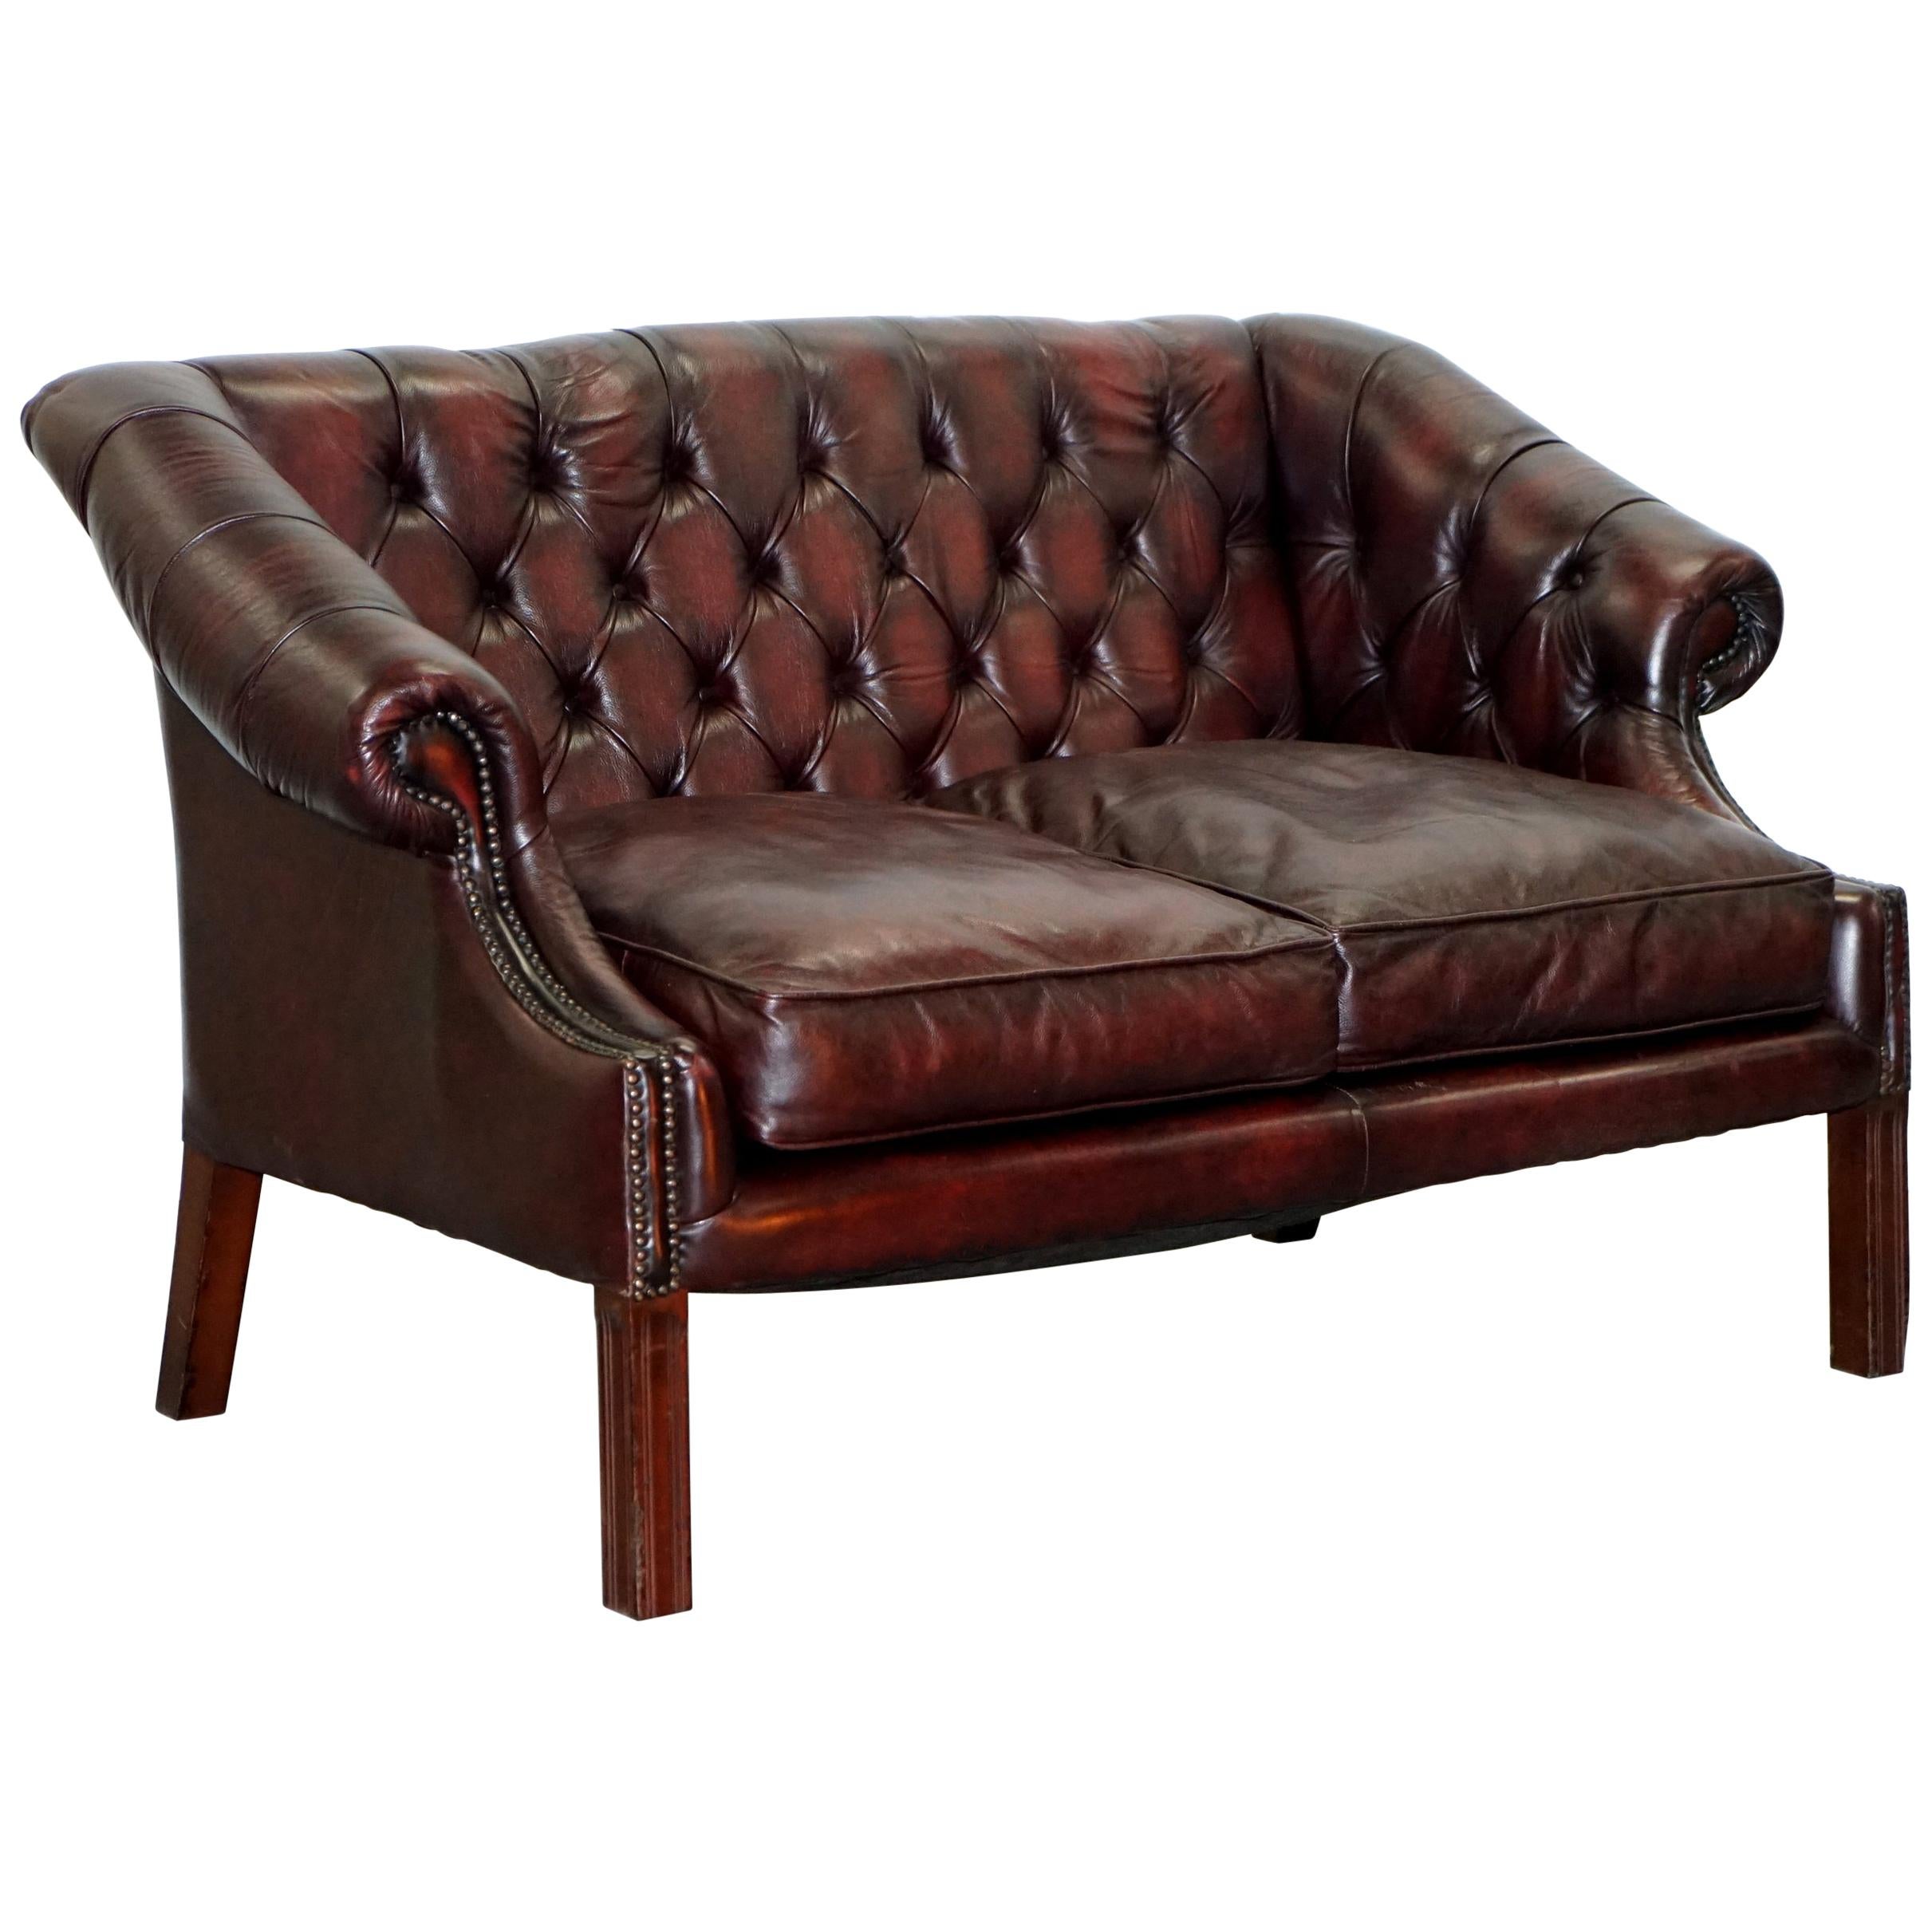 Chesterfield Lutyen's Style Viceroy's Oxblood Leather Two-Seat Sofa